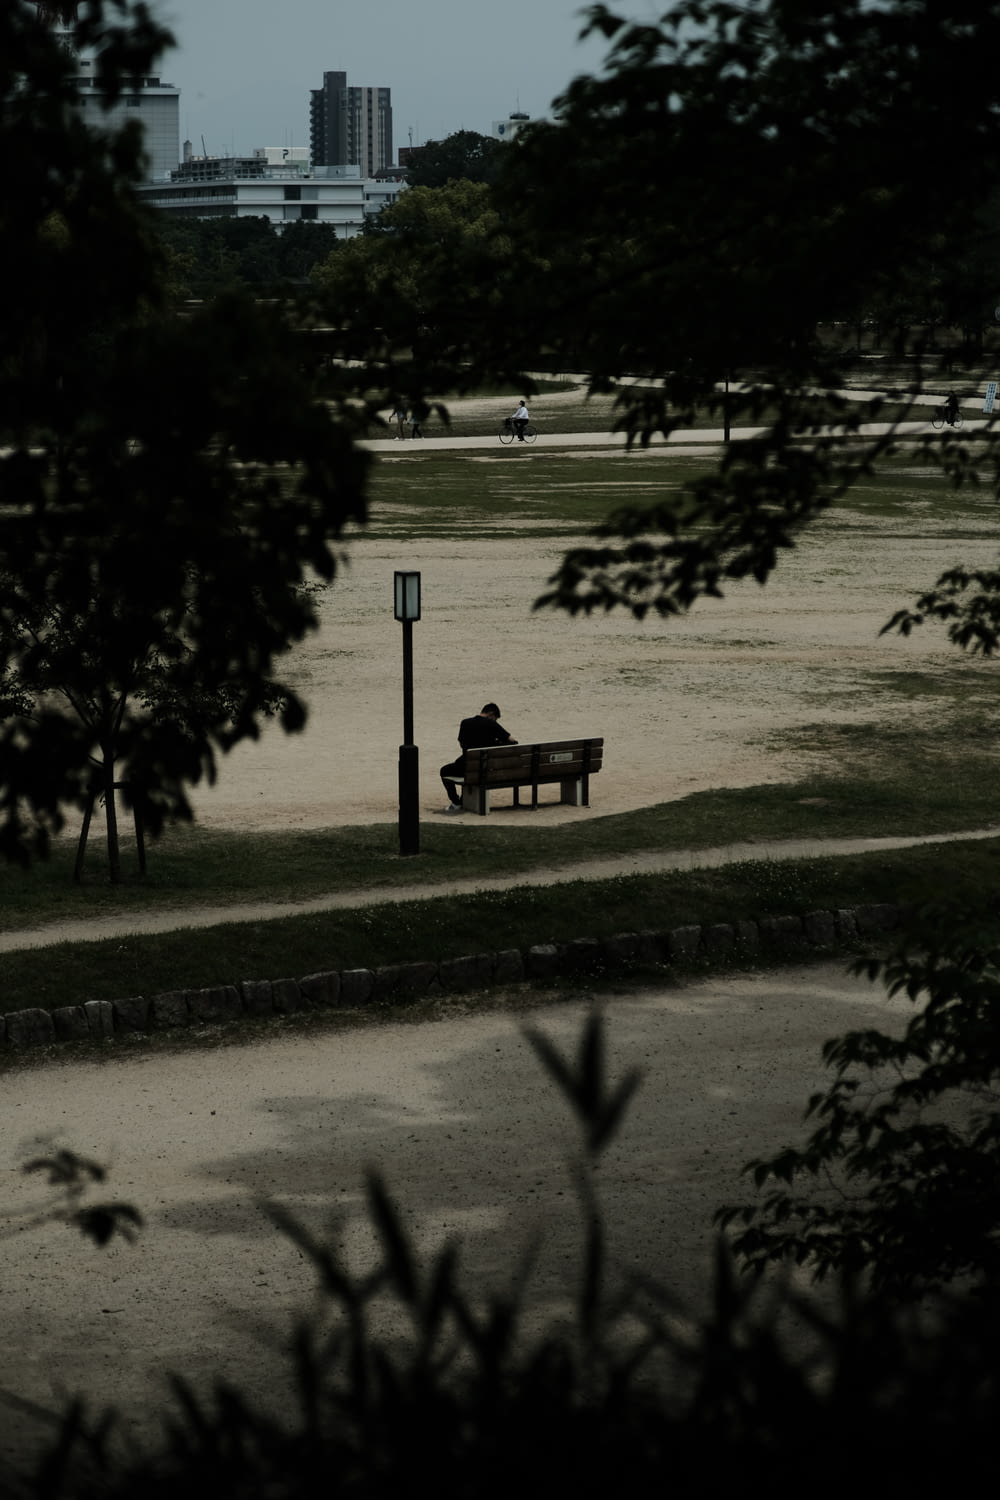 a couple sitting on a bench in a park